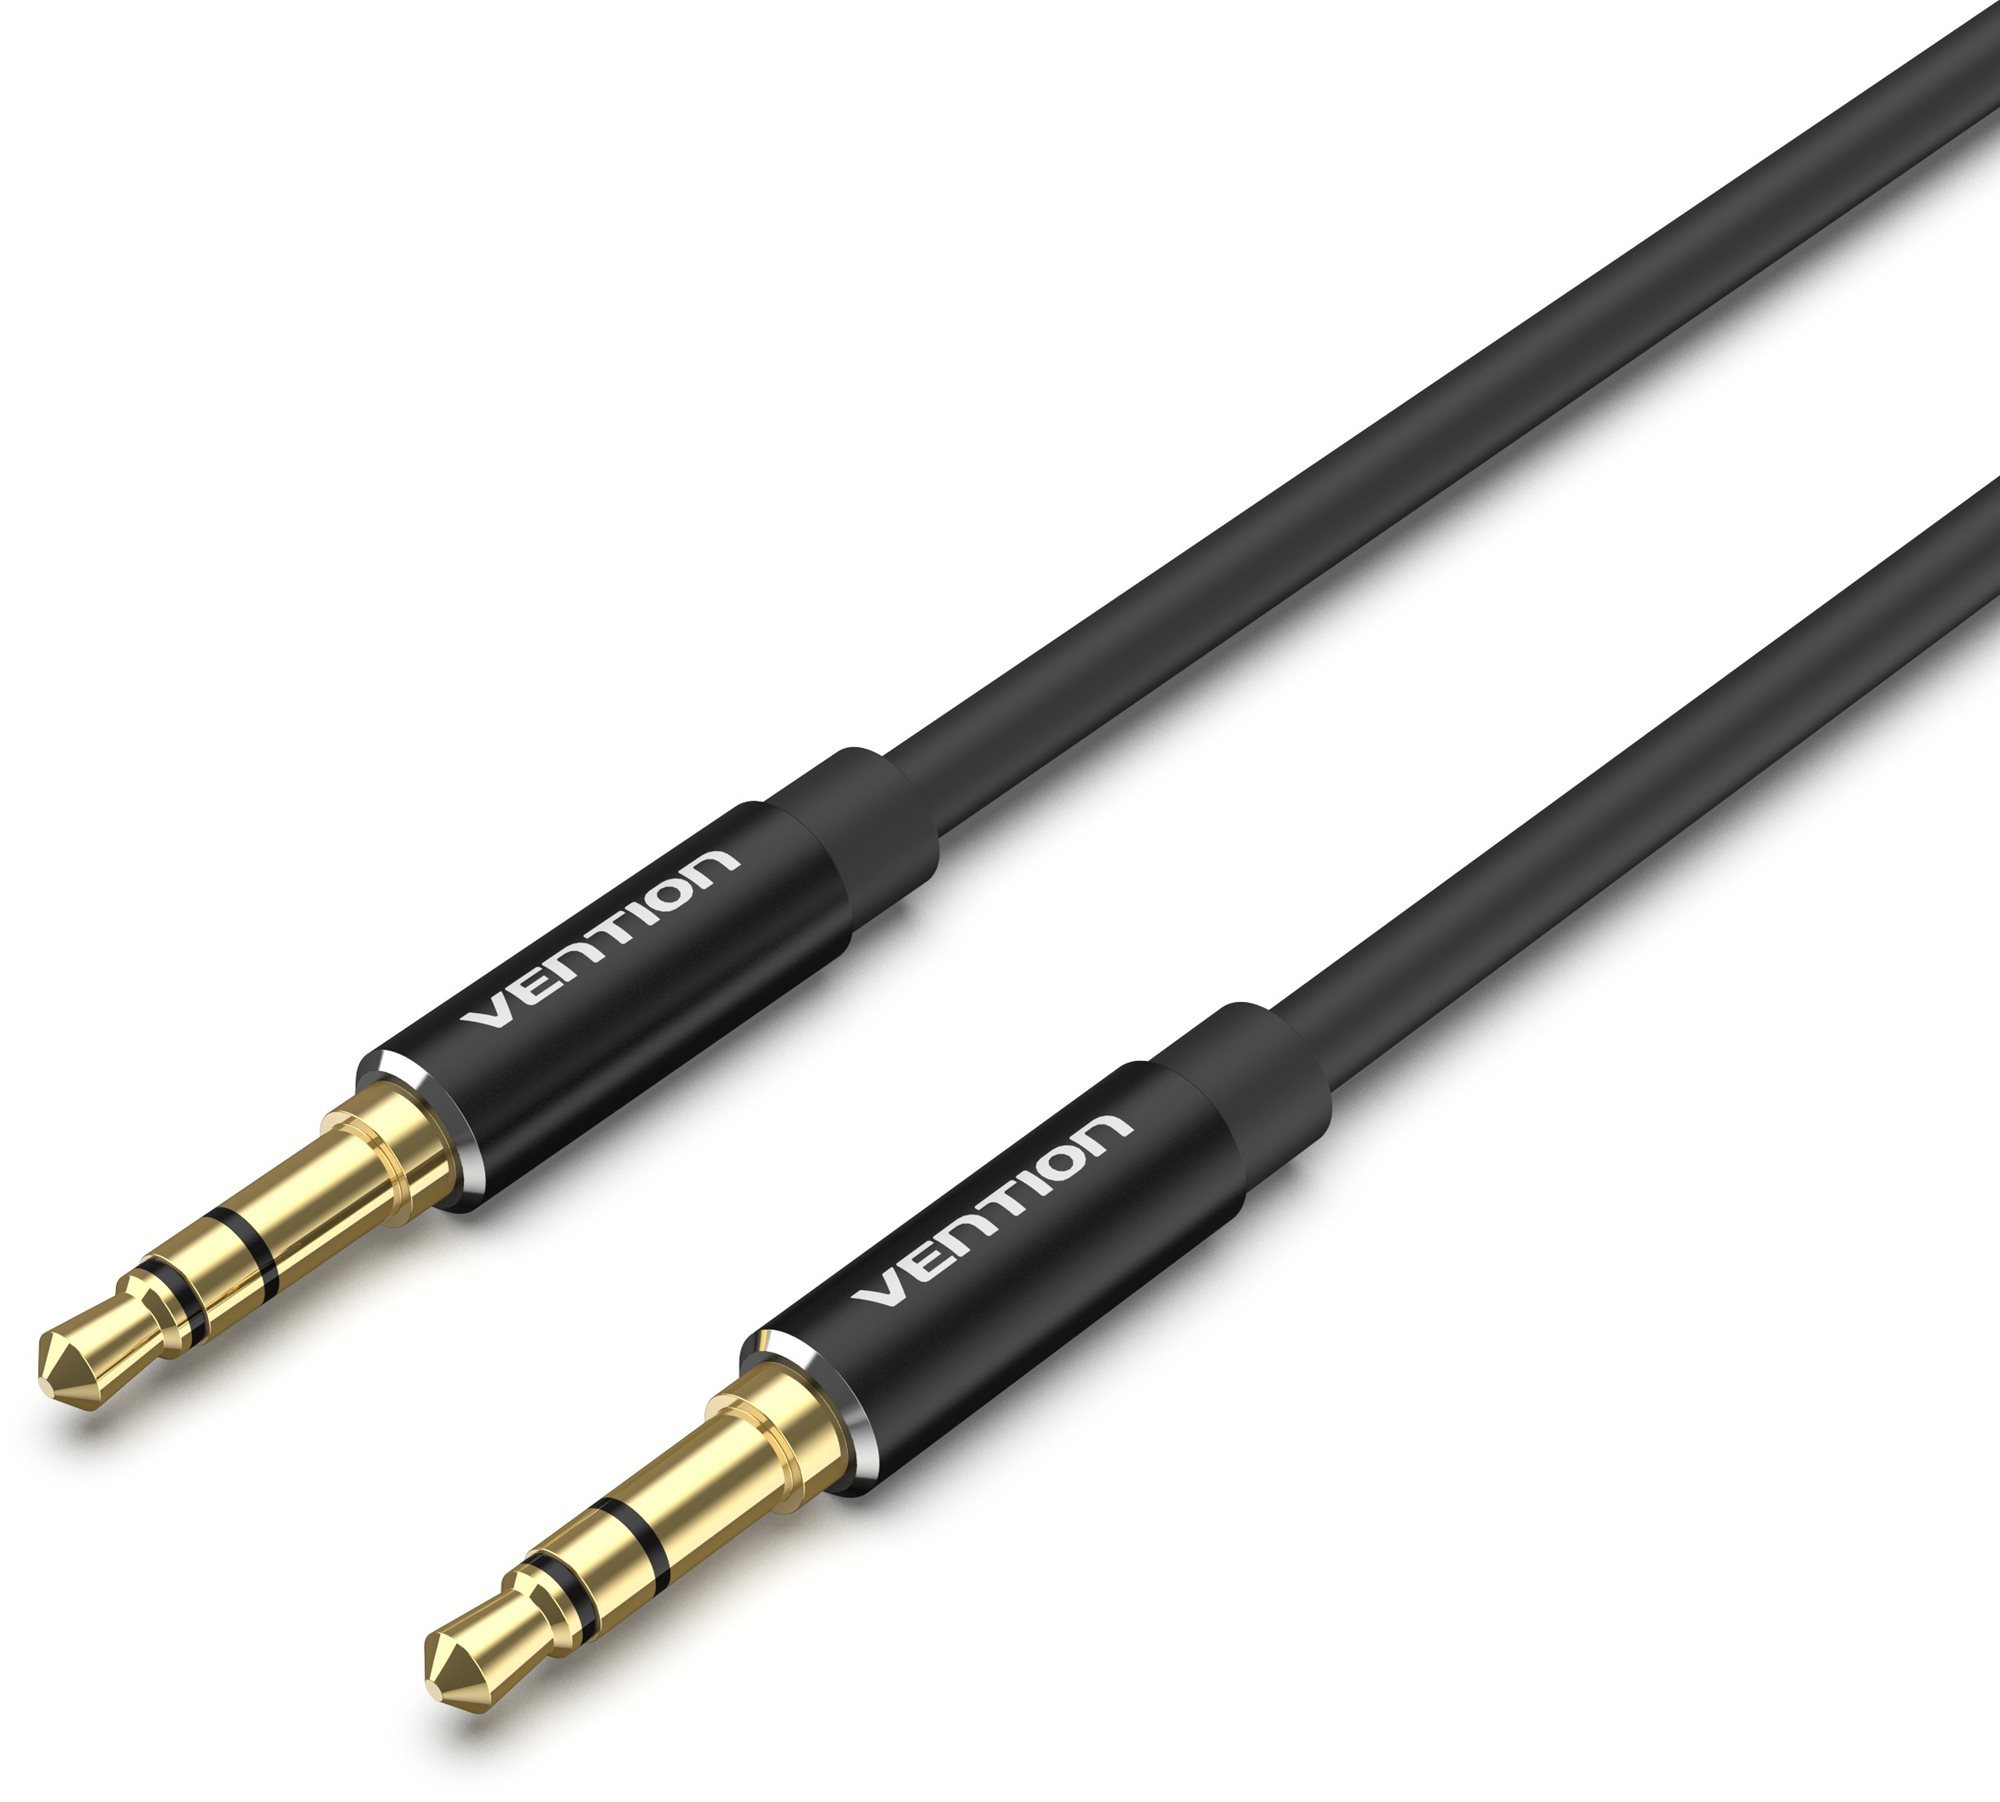 Vention 3,5 mm Male to Male Audio Cable 1,5 m Black Aluminum Alloy Type